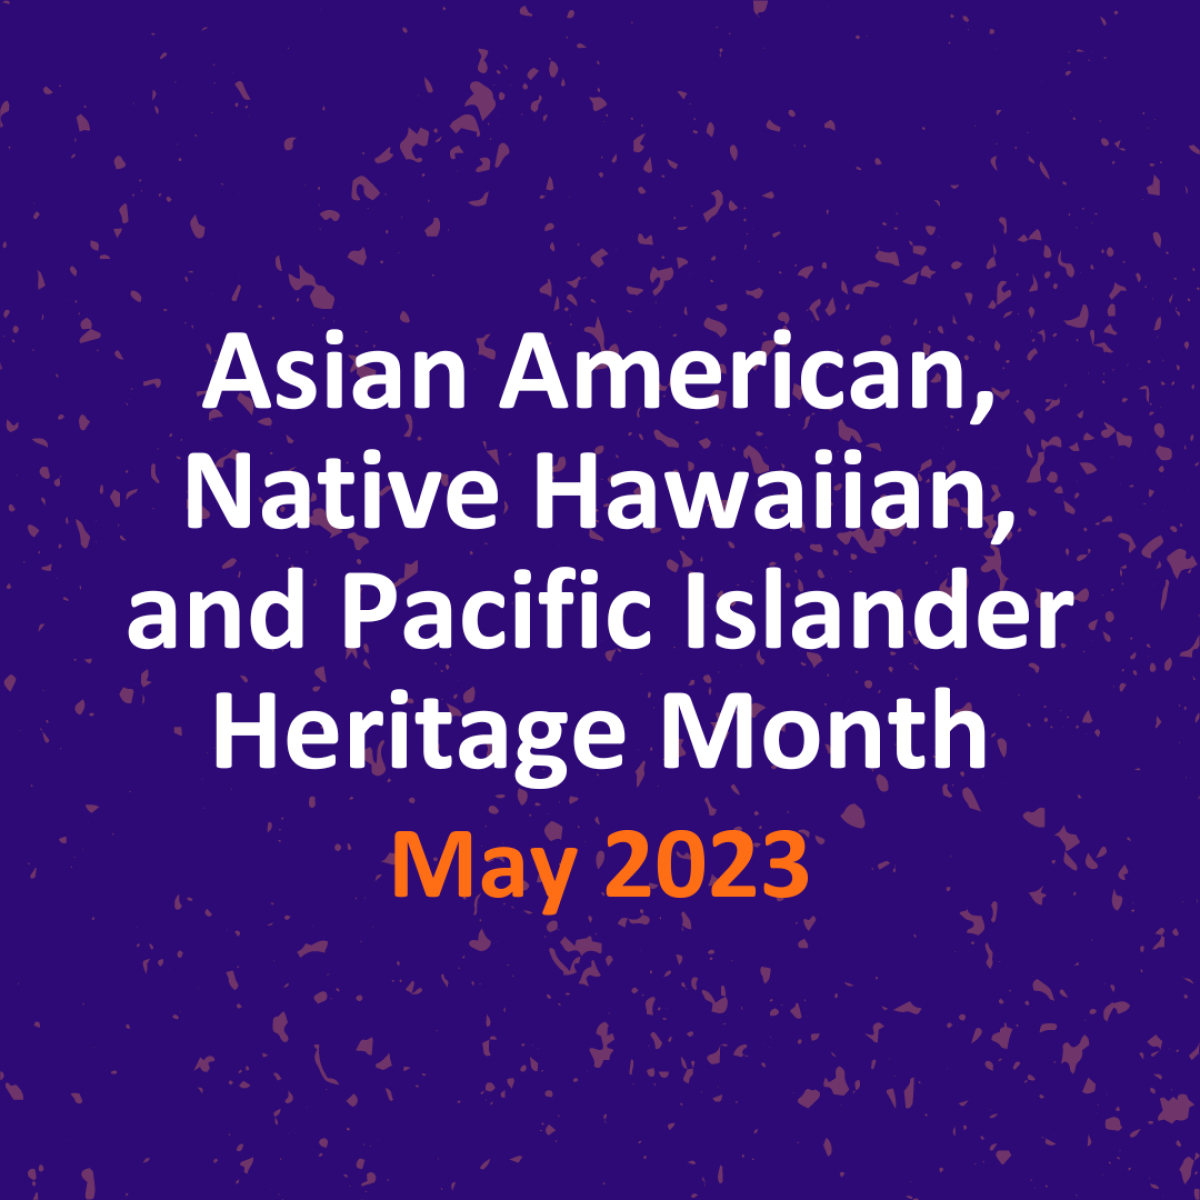 Iowa Primary Care Association Recognizes Asian American, Native Hawaiian, and Pacific Islander Heritage Month